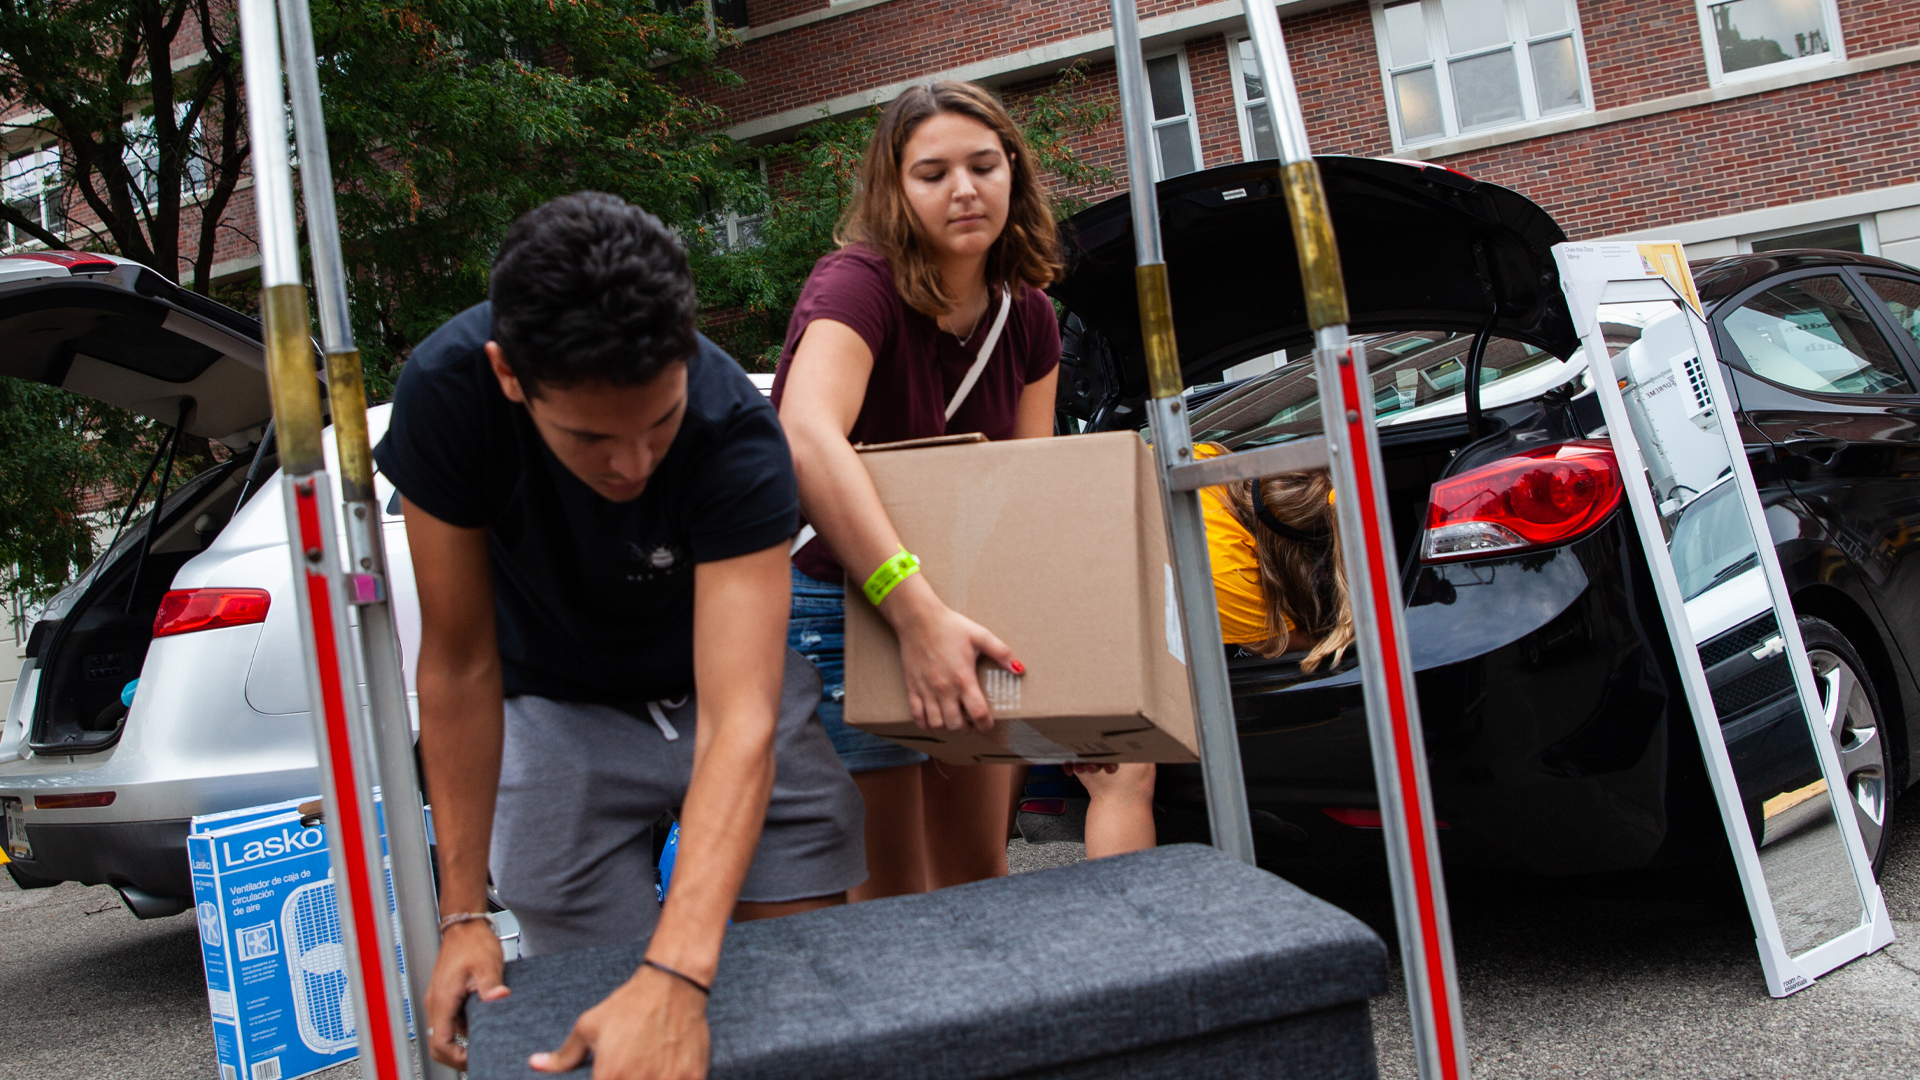 Student unloading boxes from a vehicle